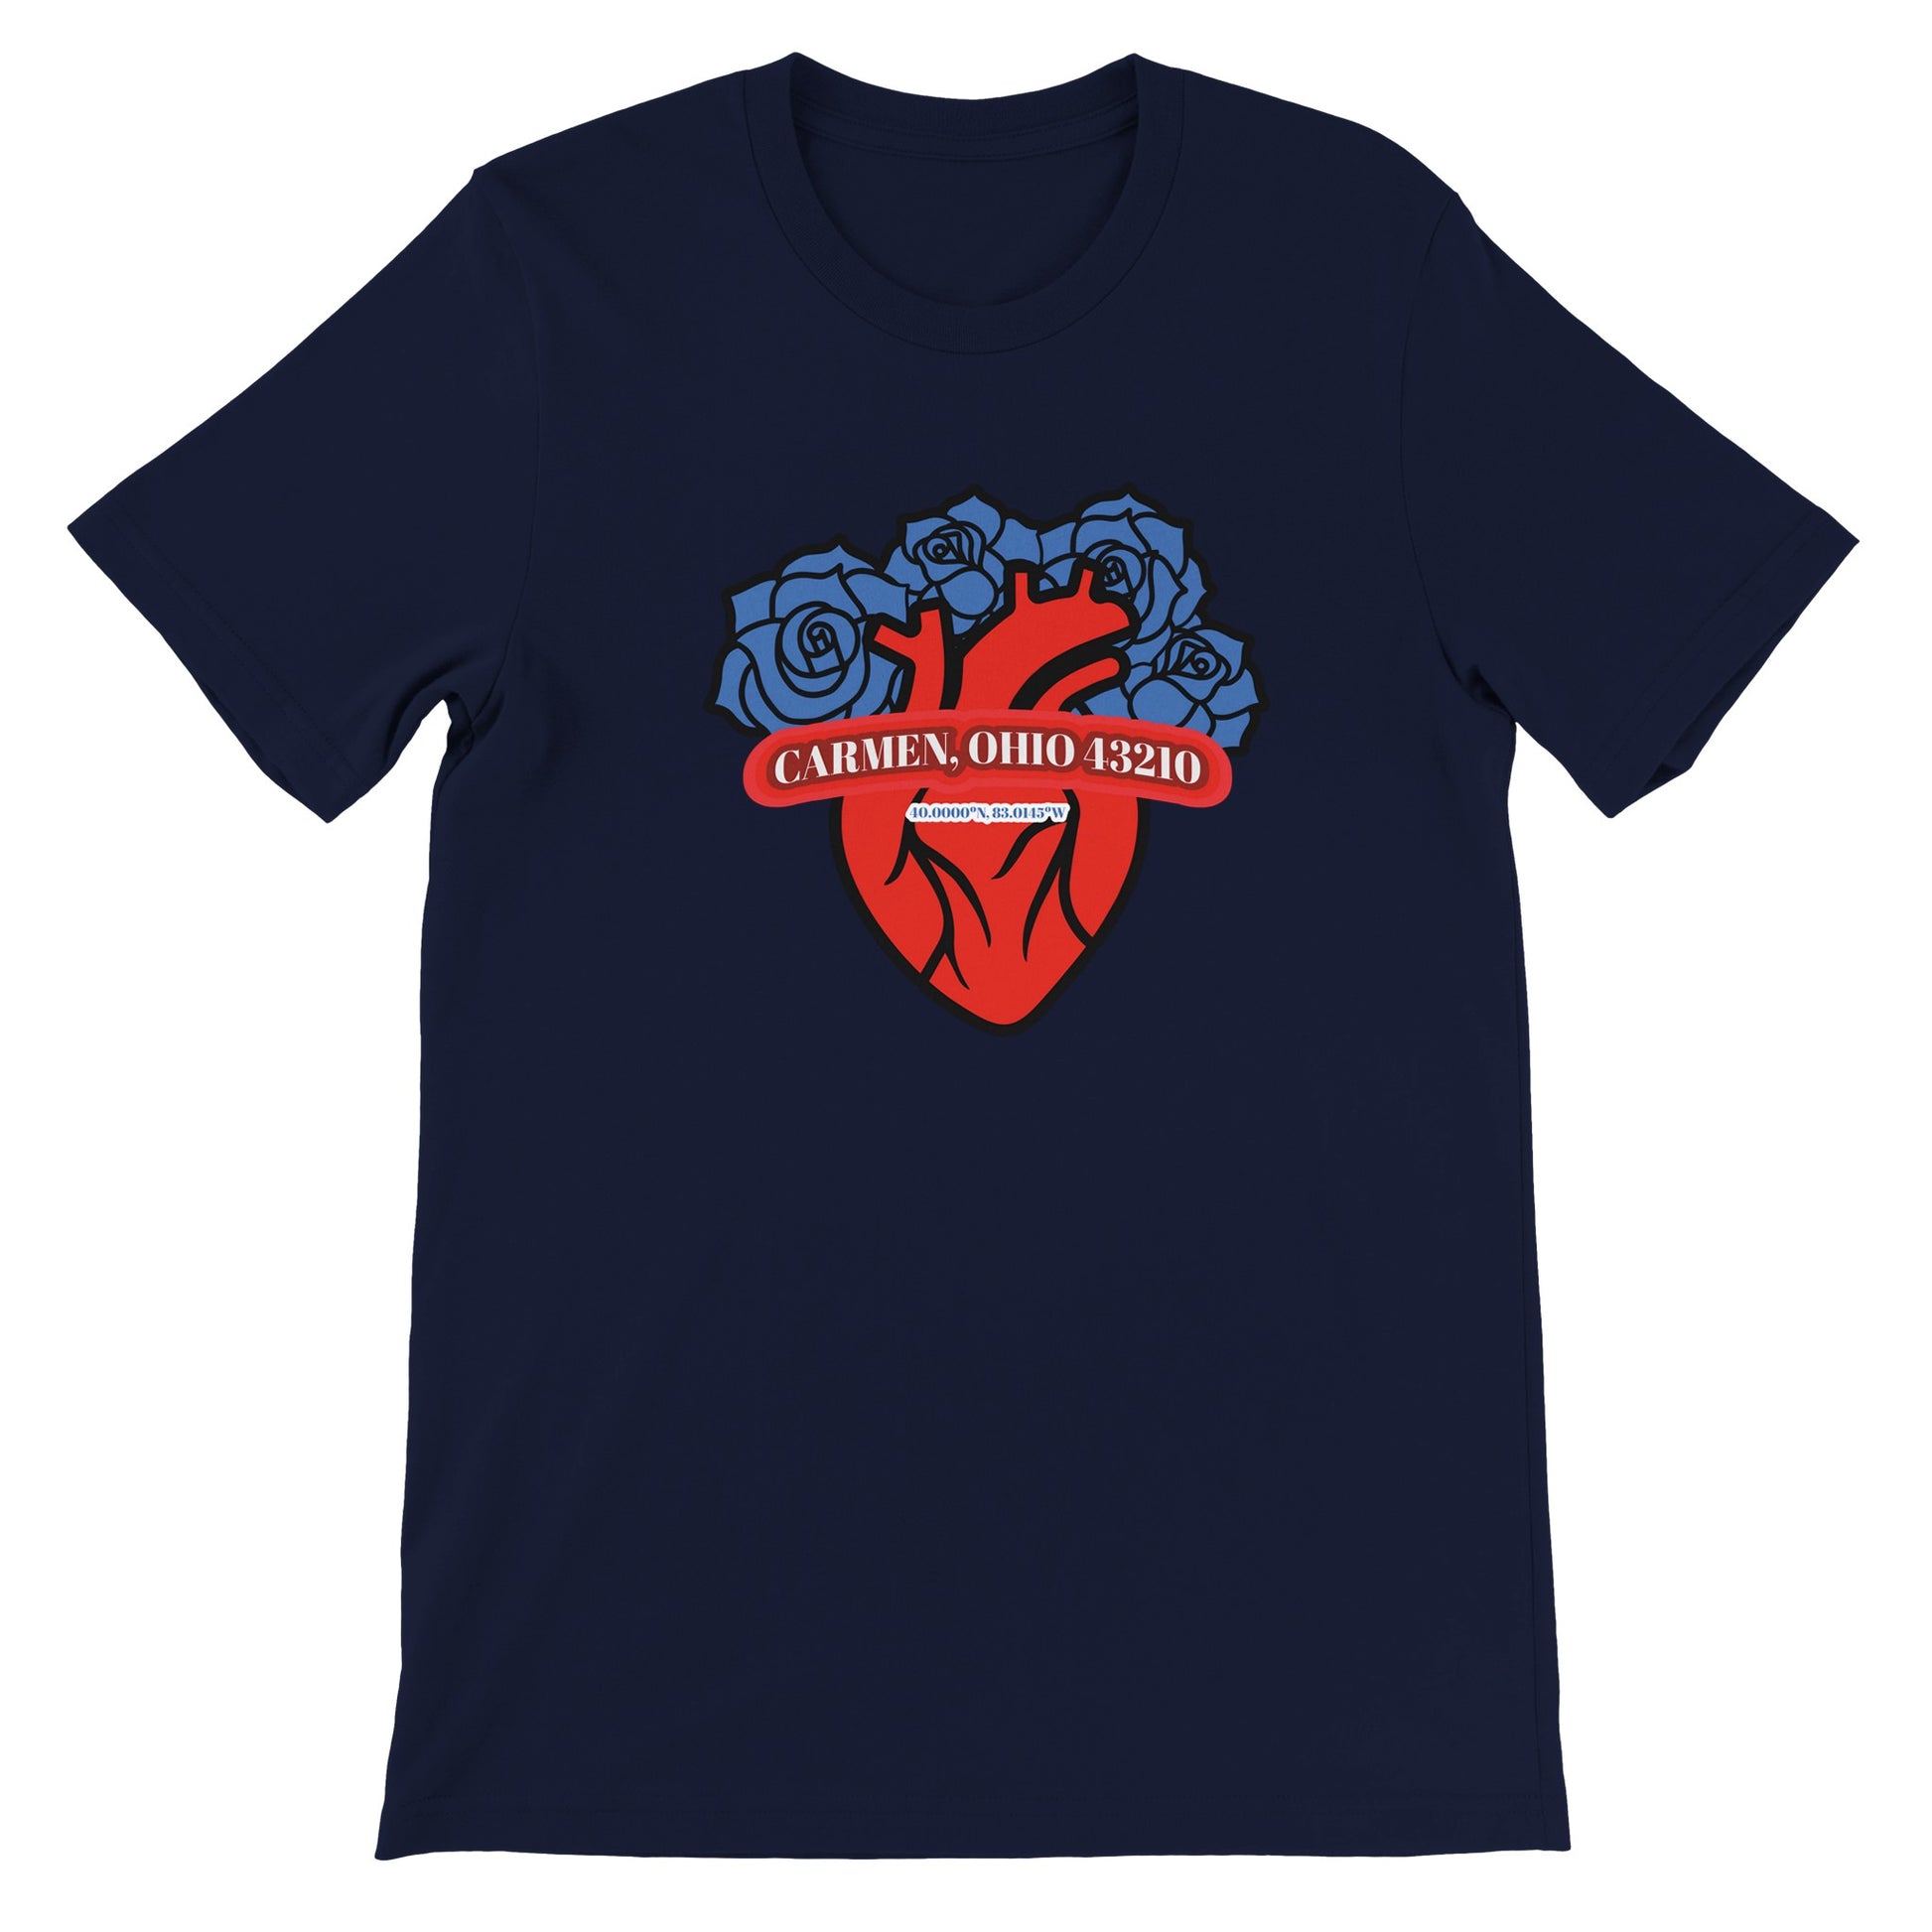 Heart and Roses Design